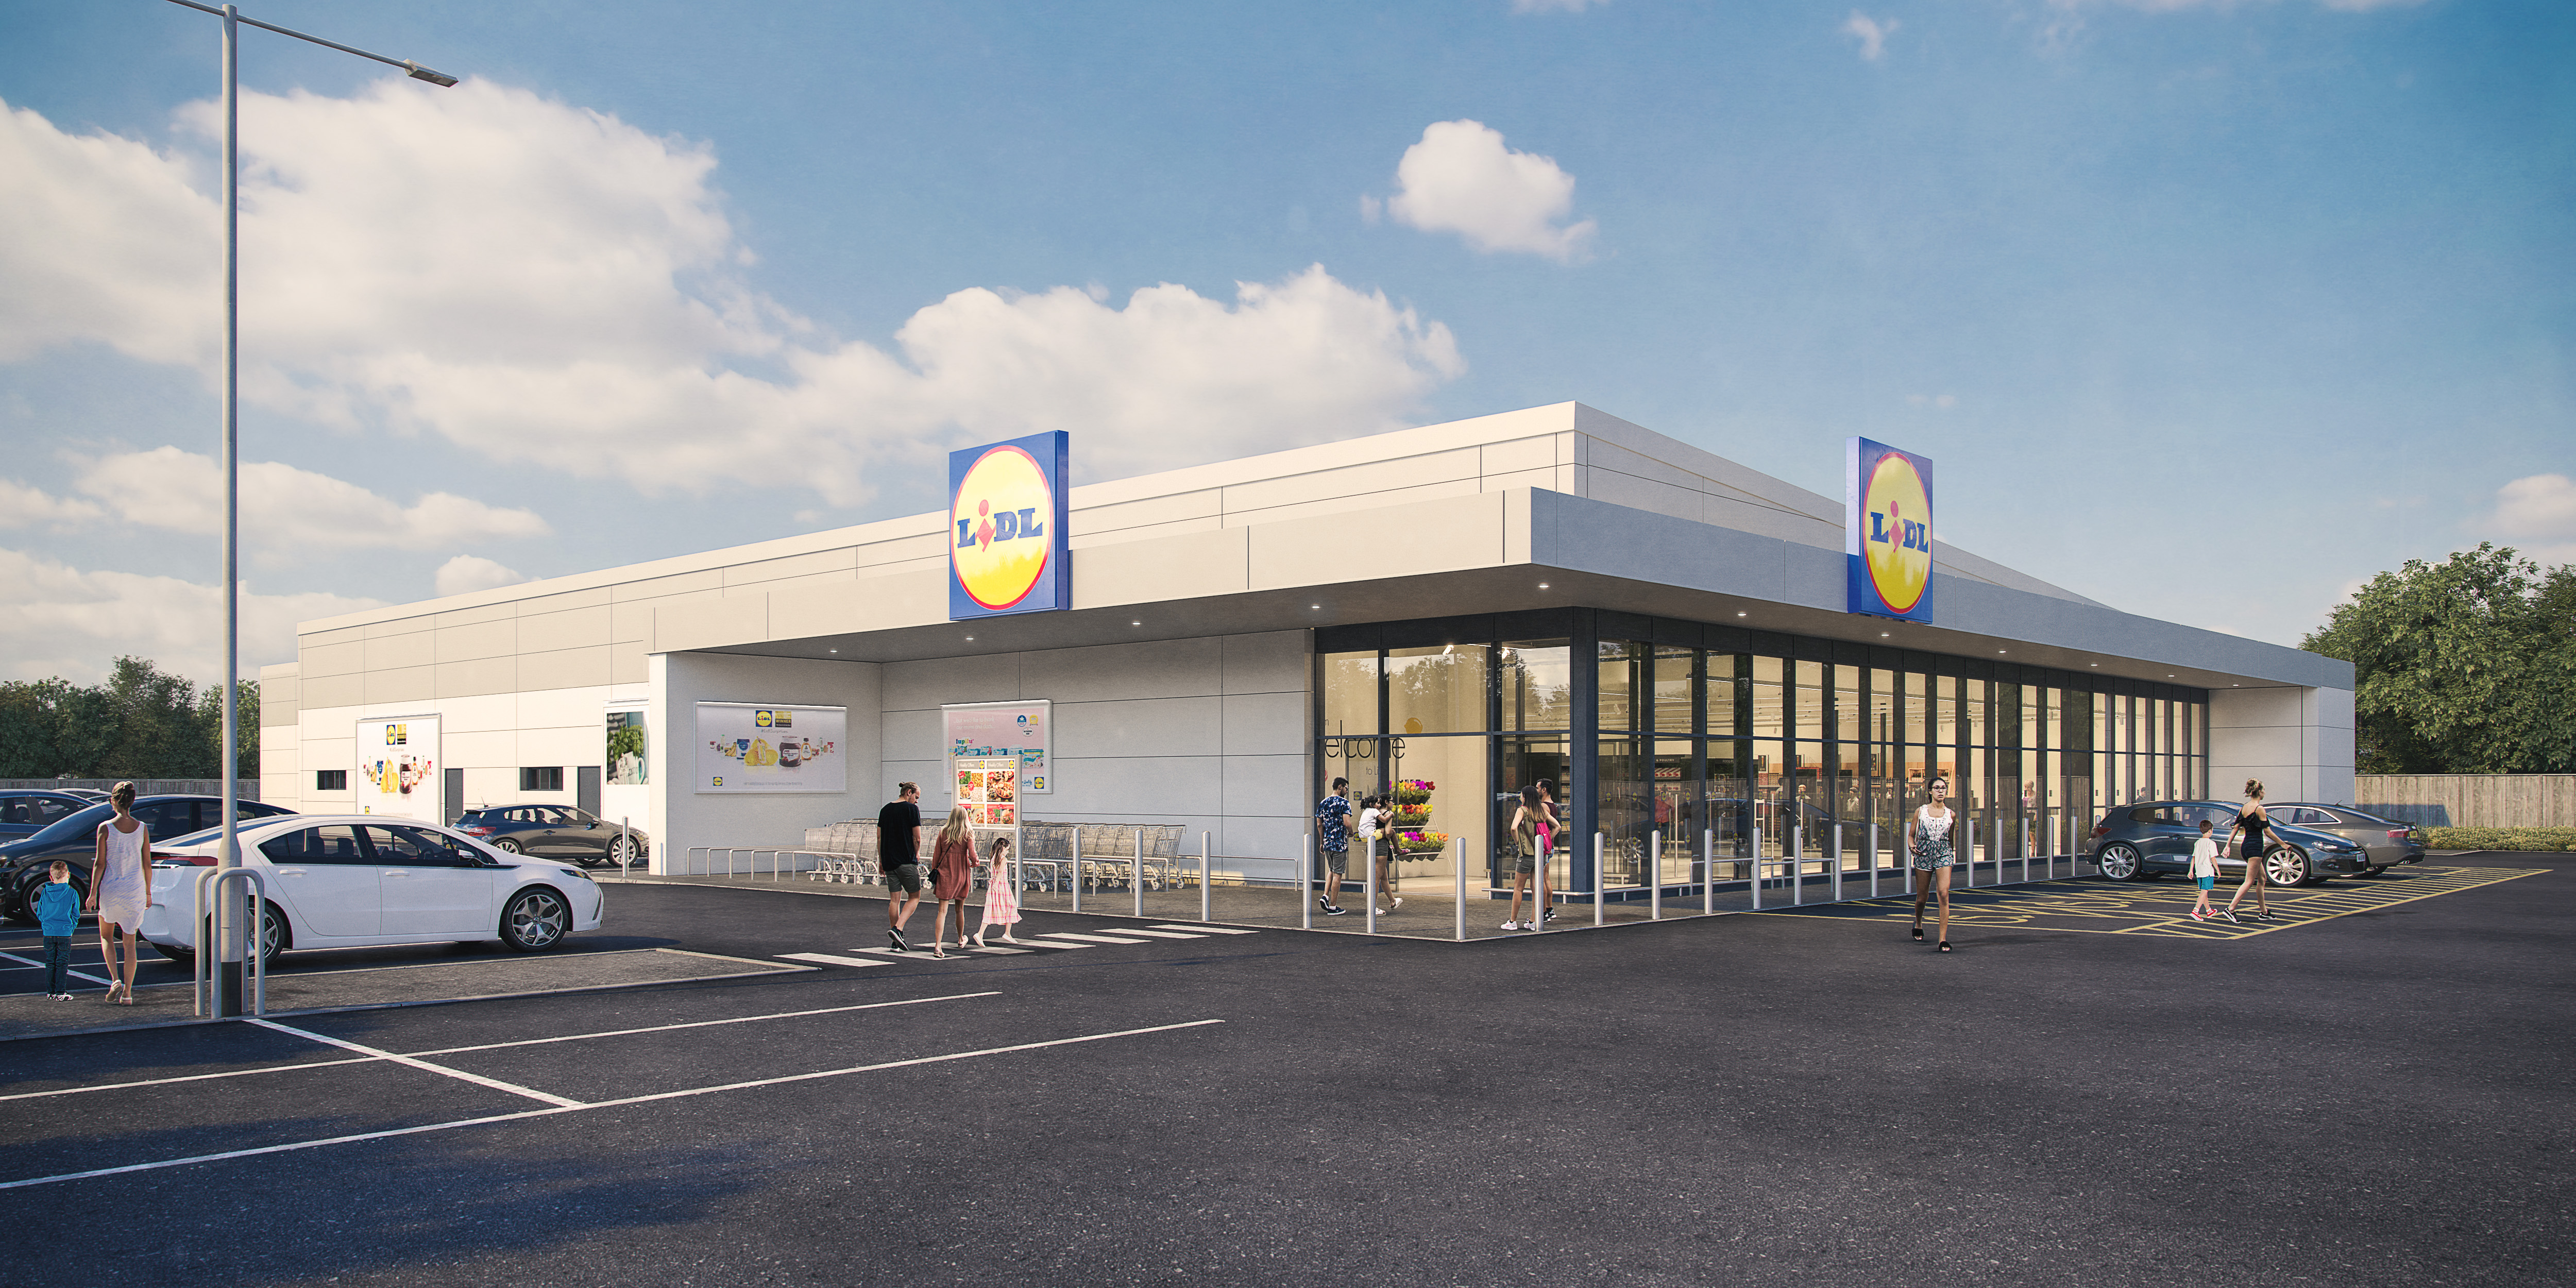 Clark Contracts to deliver new Lidl supermarket for Bathgate